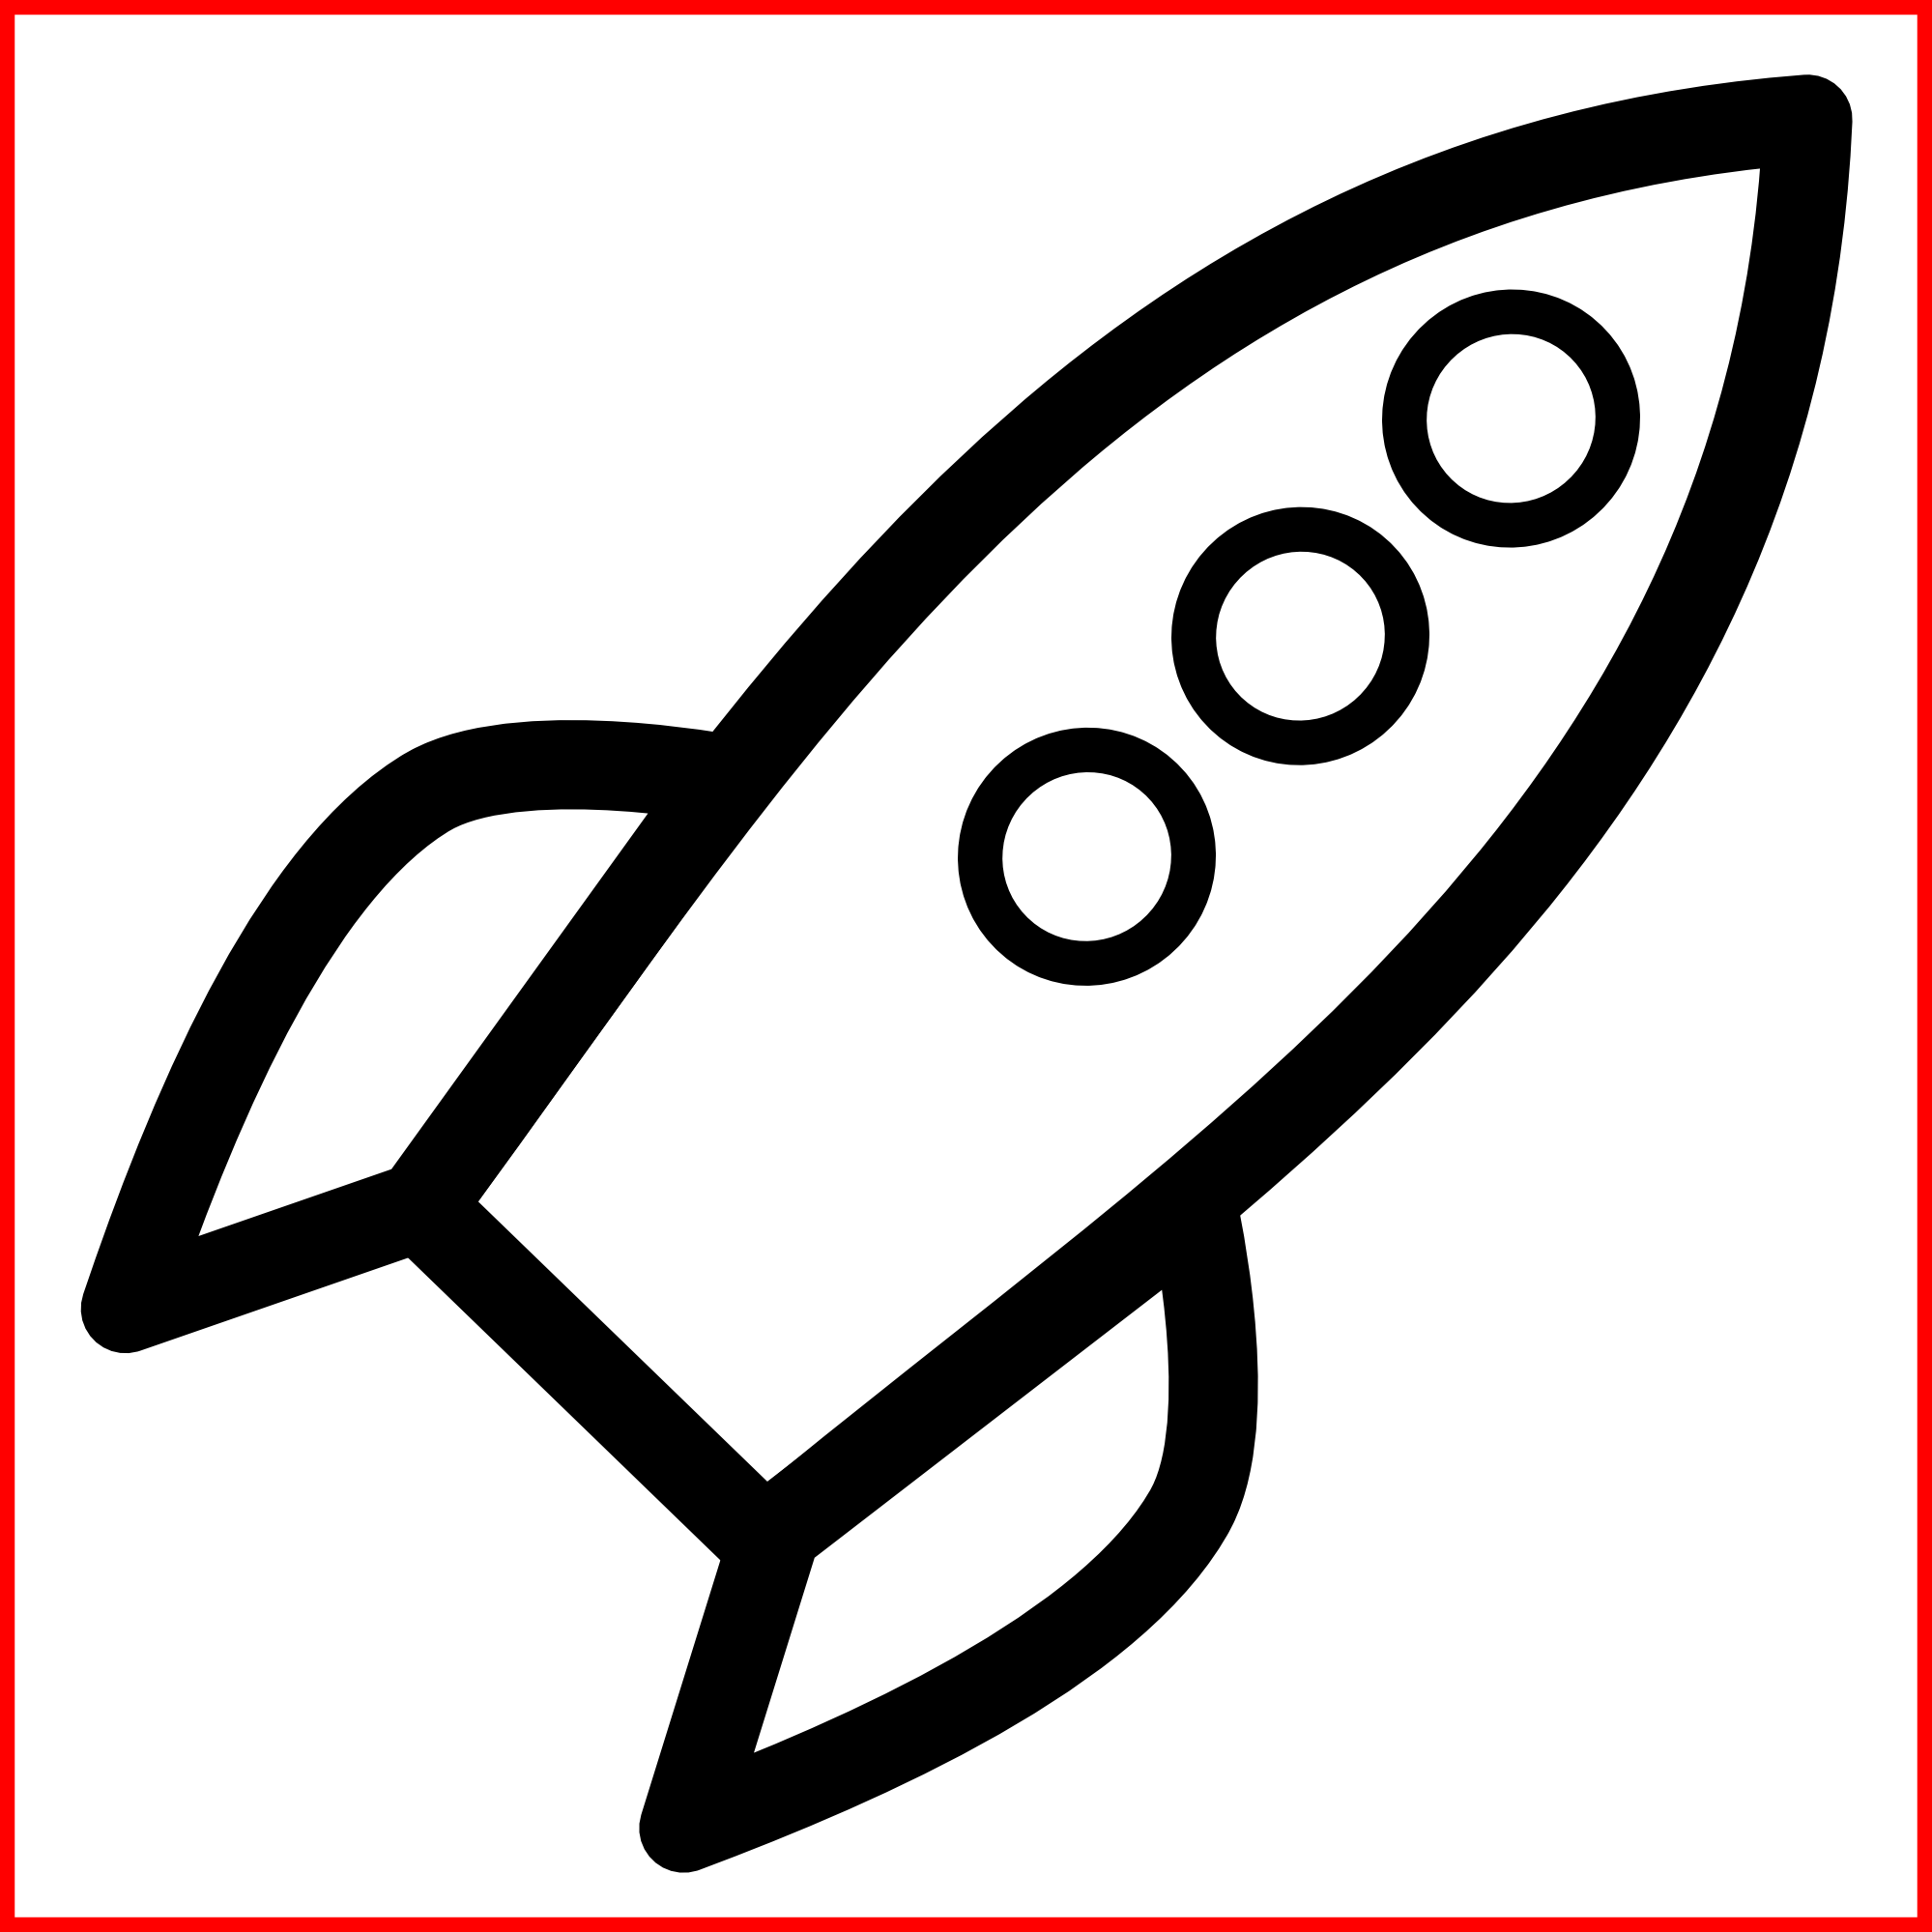 Clipart rocket space craft. Shocking black and white